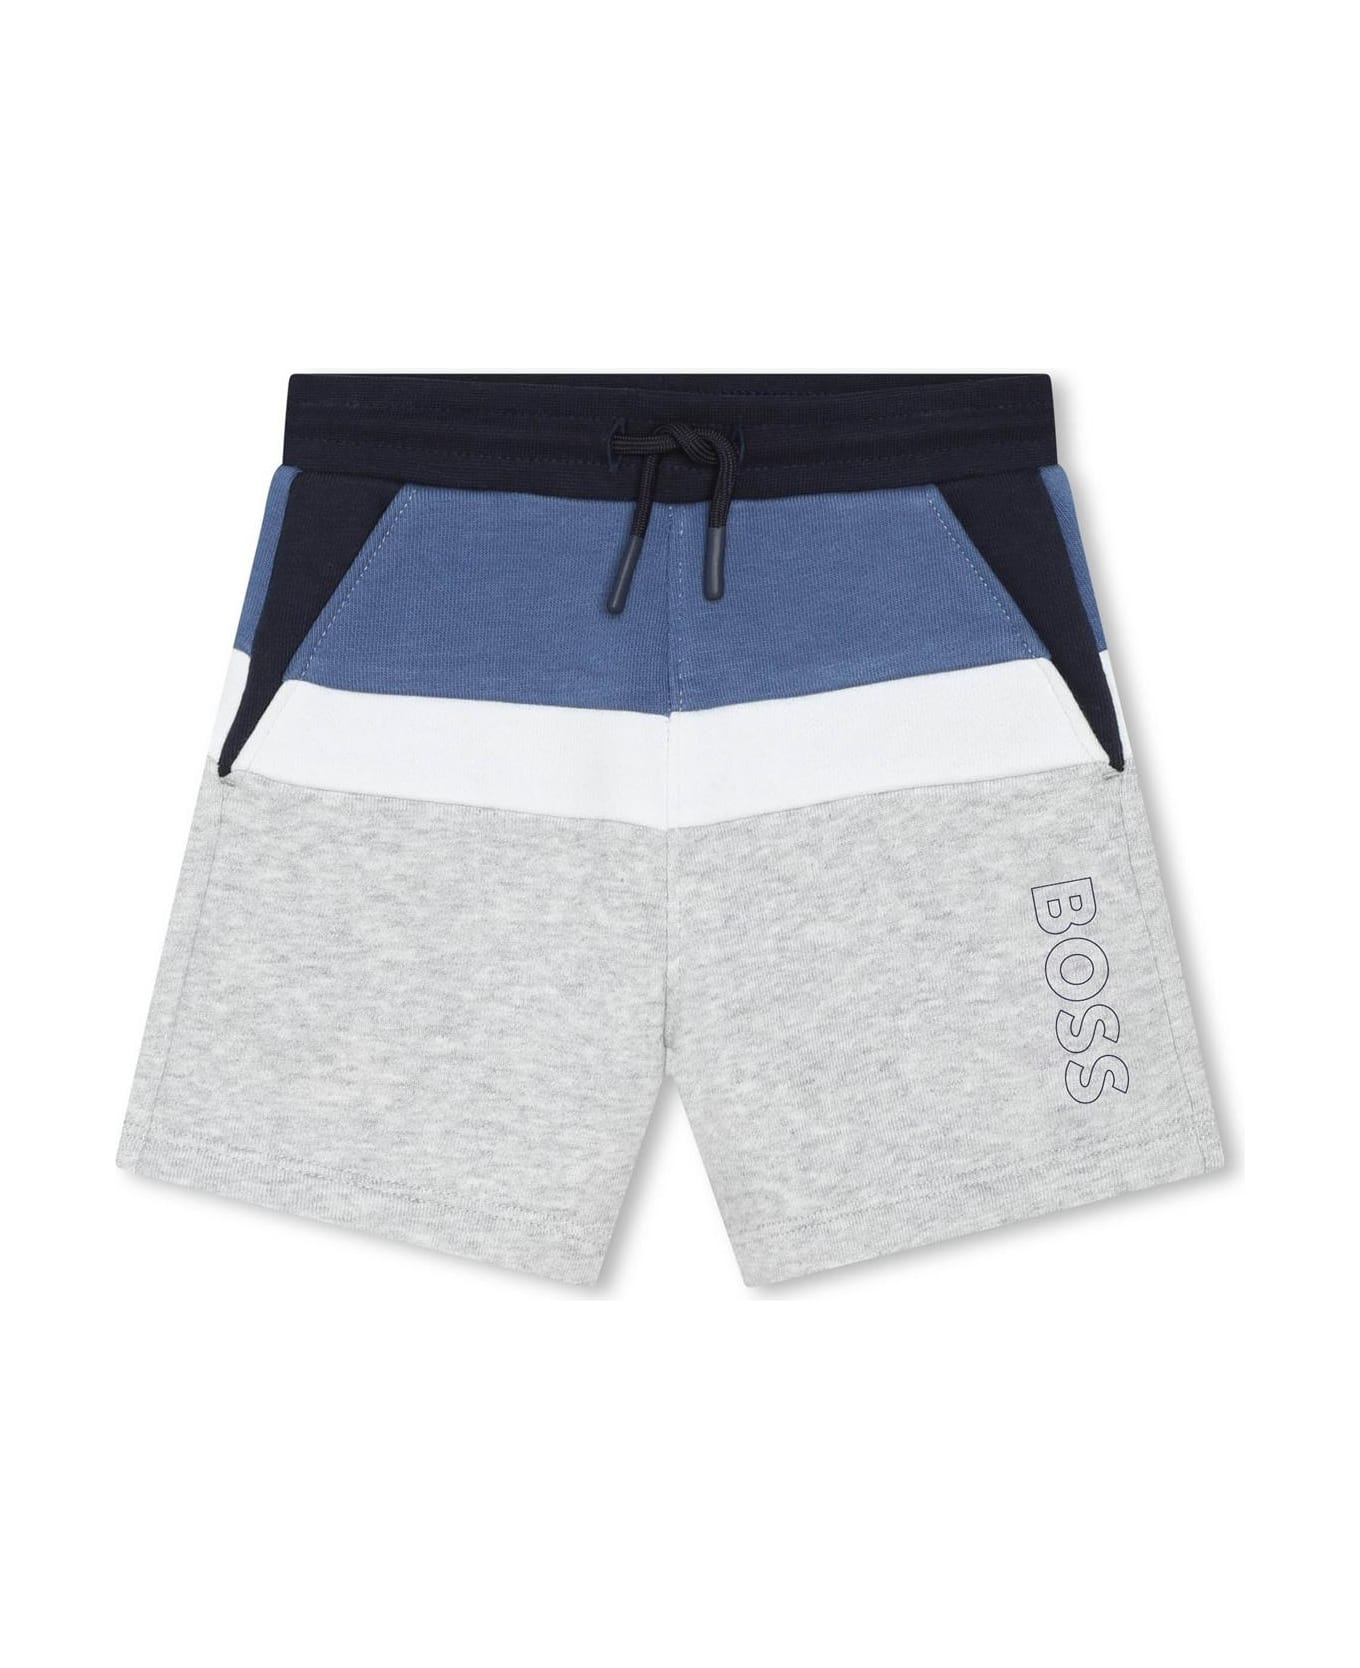 Hugo Boss Shorts With Color-block Design - Gray